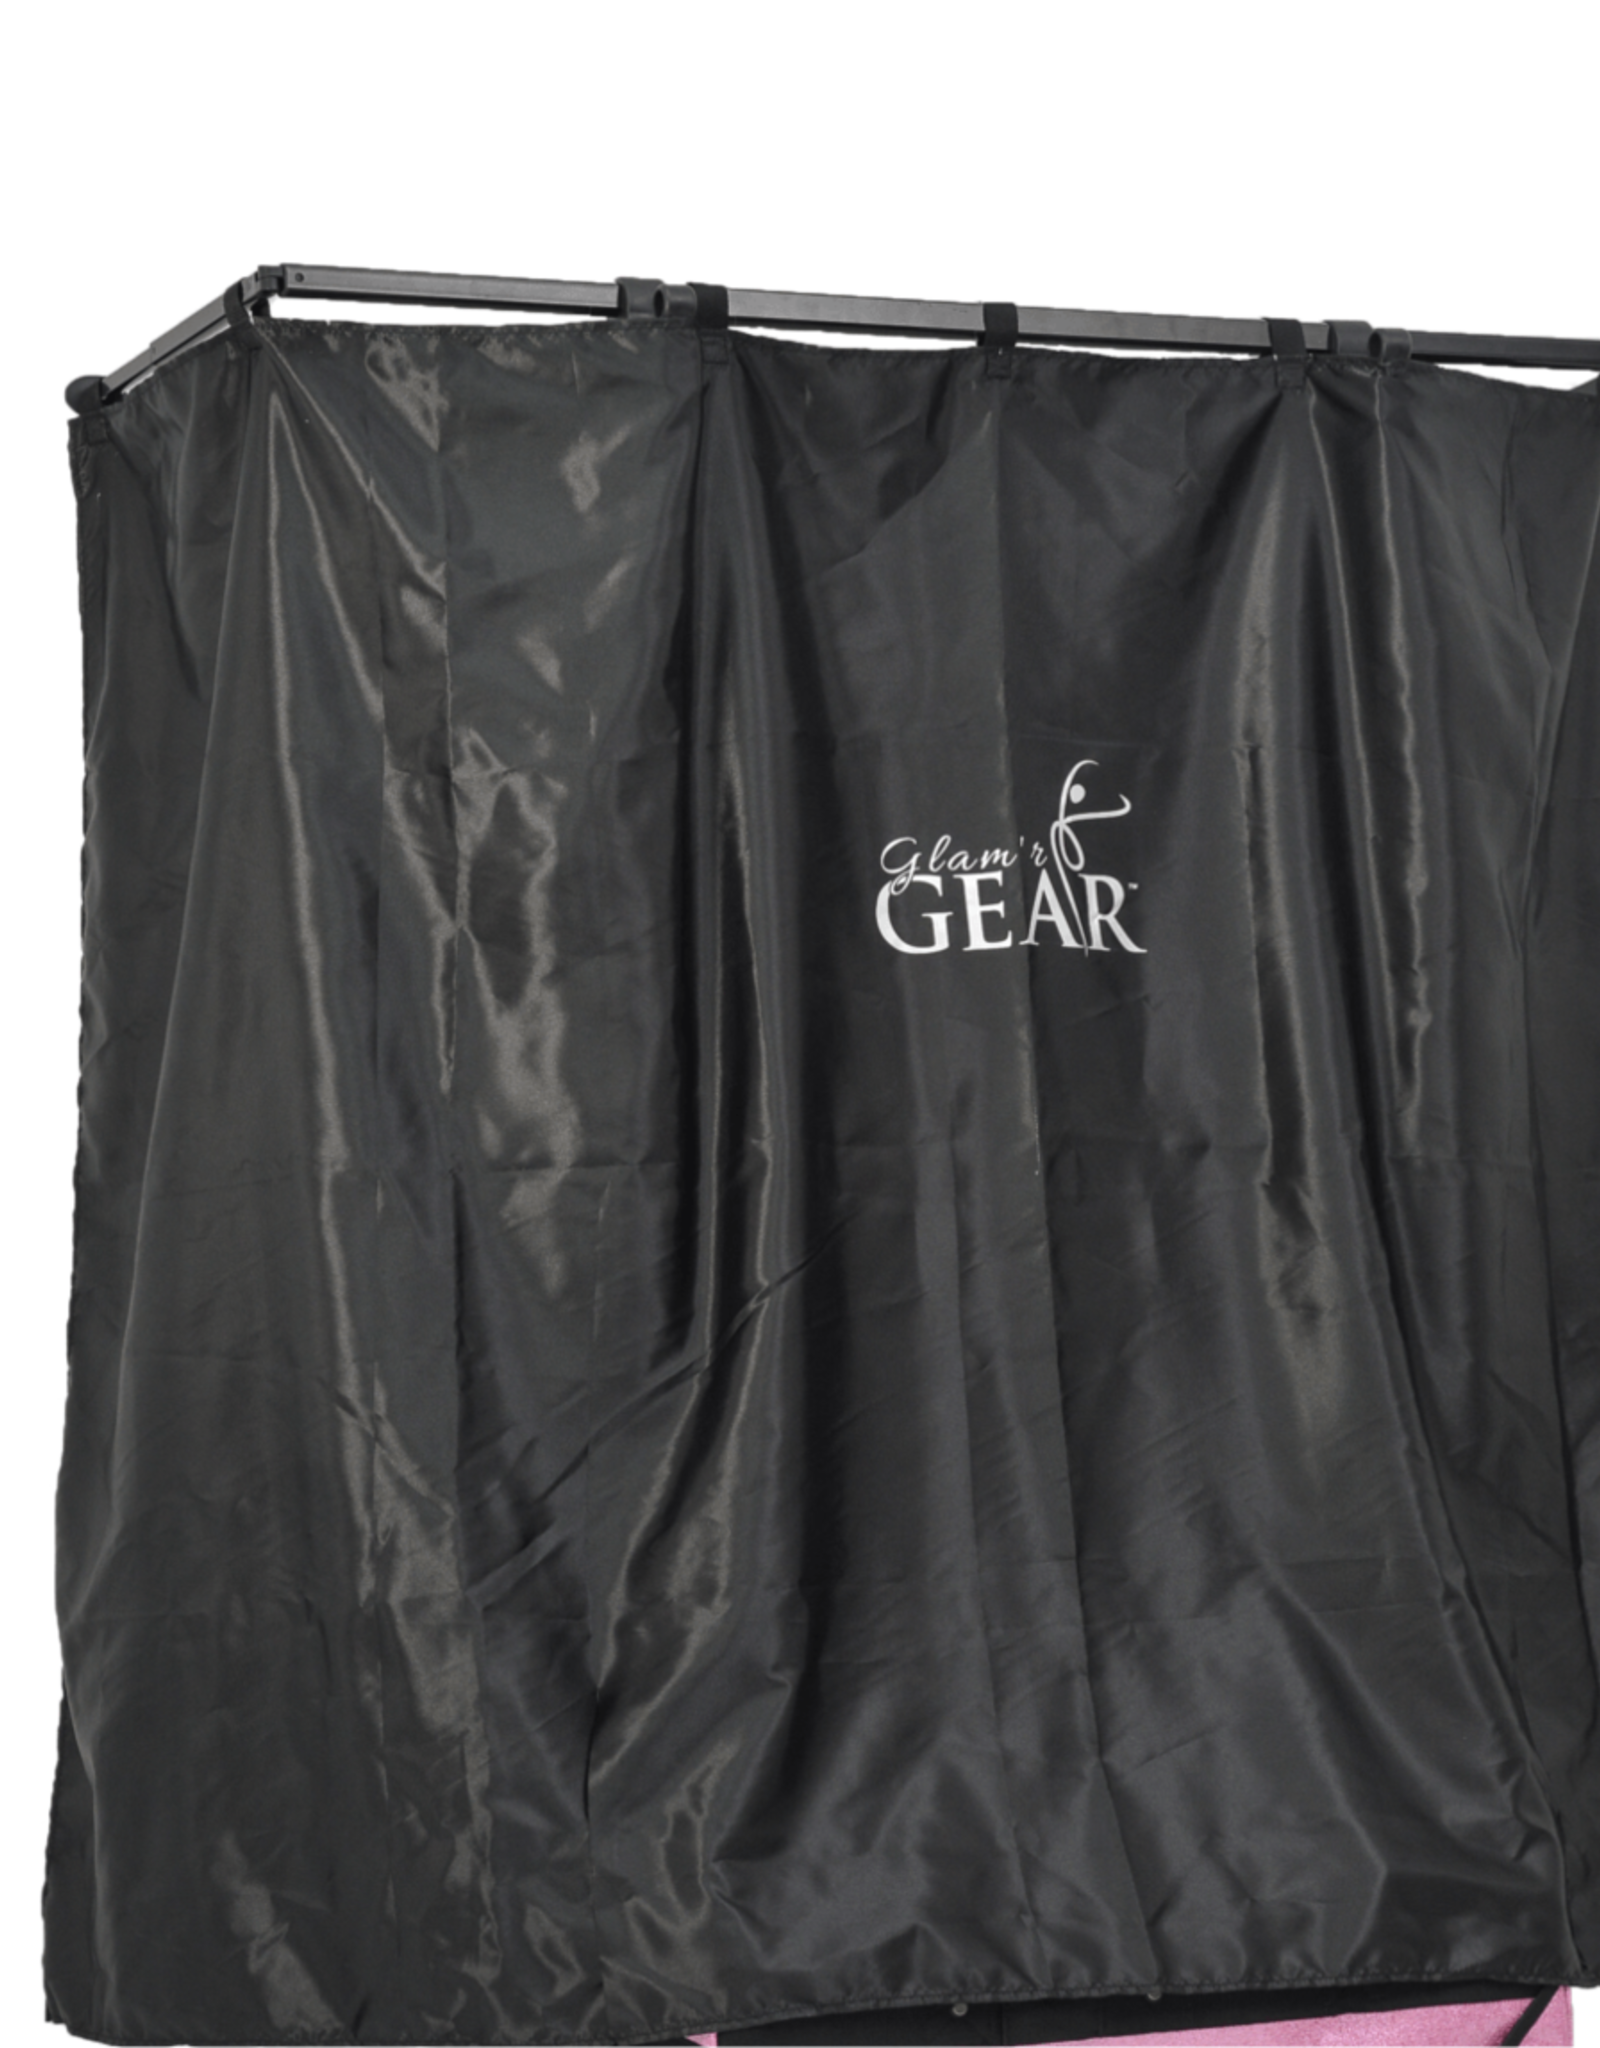 Glam'r Gear Large,  UHIDE Privacy Curtain